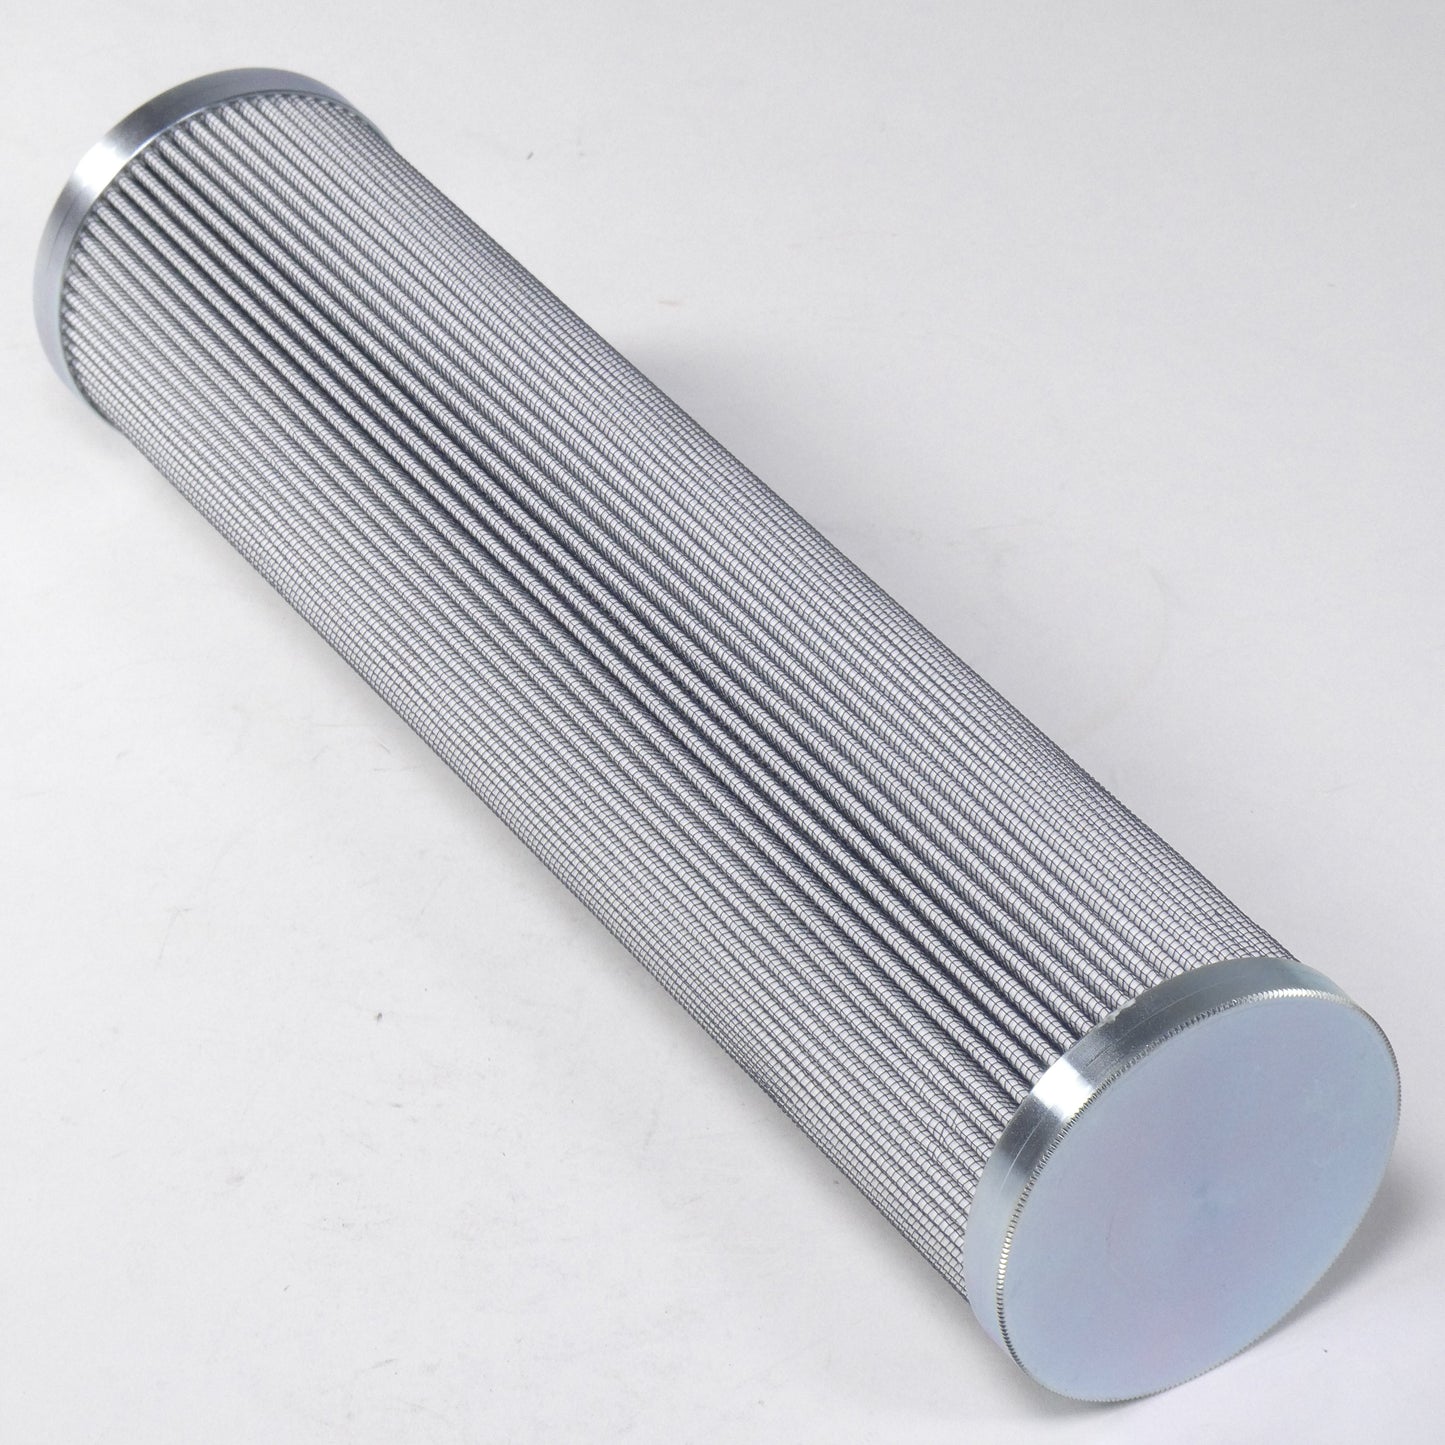 Hydrafil Replacement Filter Element for Pall AC9601FUT13H